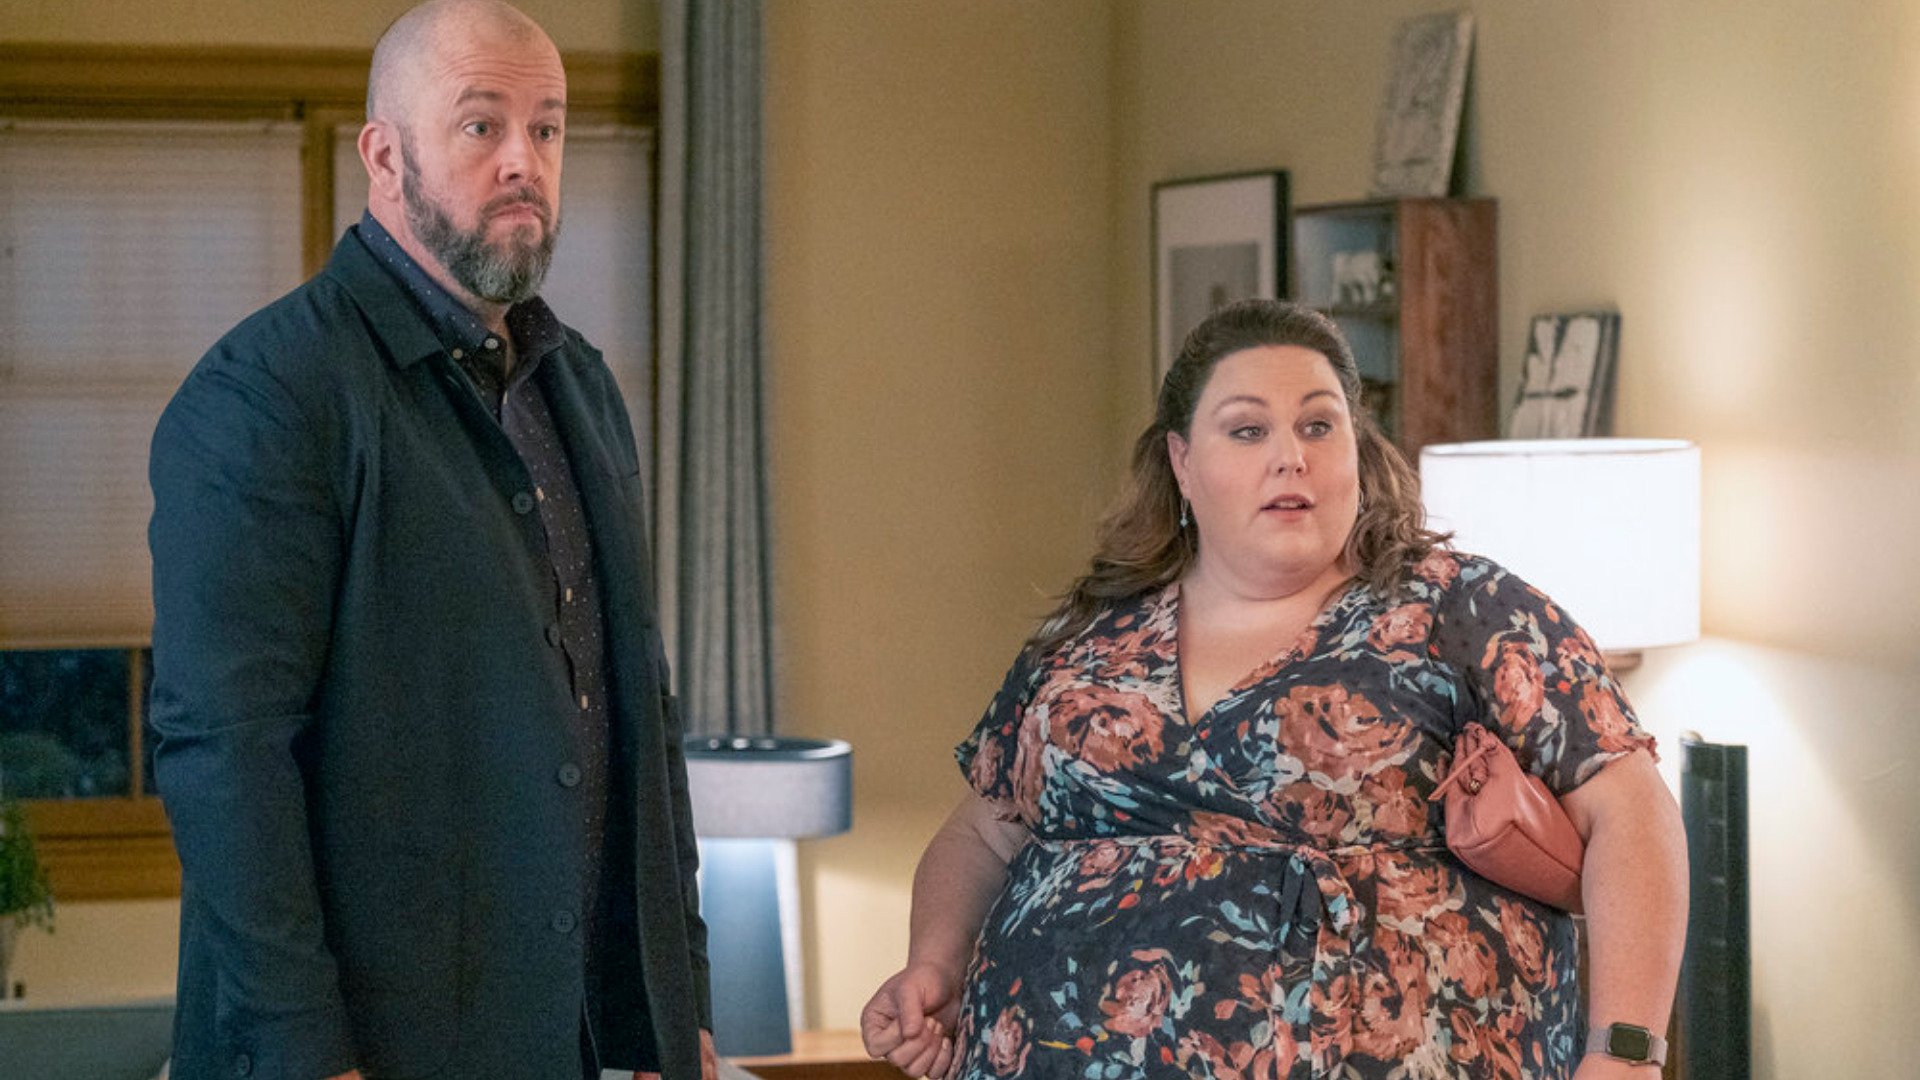 Chris Sullivan as Toby and Chrissy Metz as Kate fight in ‘This Is Us’ Season 6 Episode 3, ‘Four Fathers’